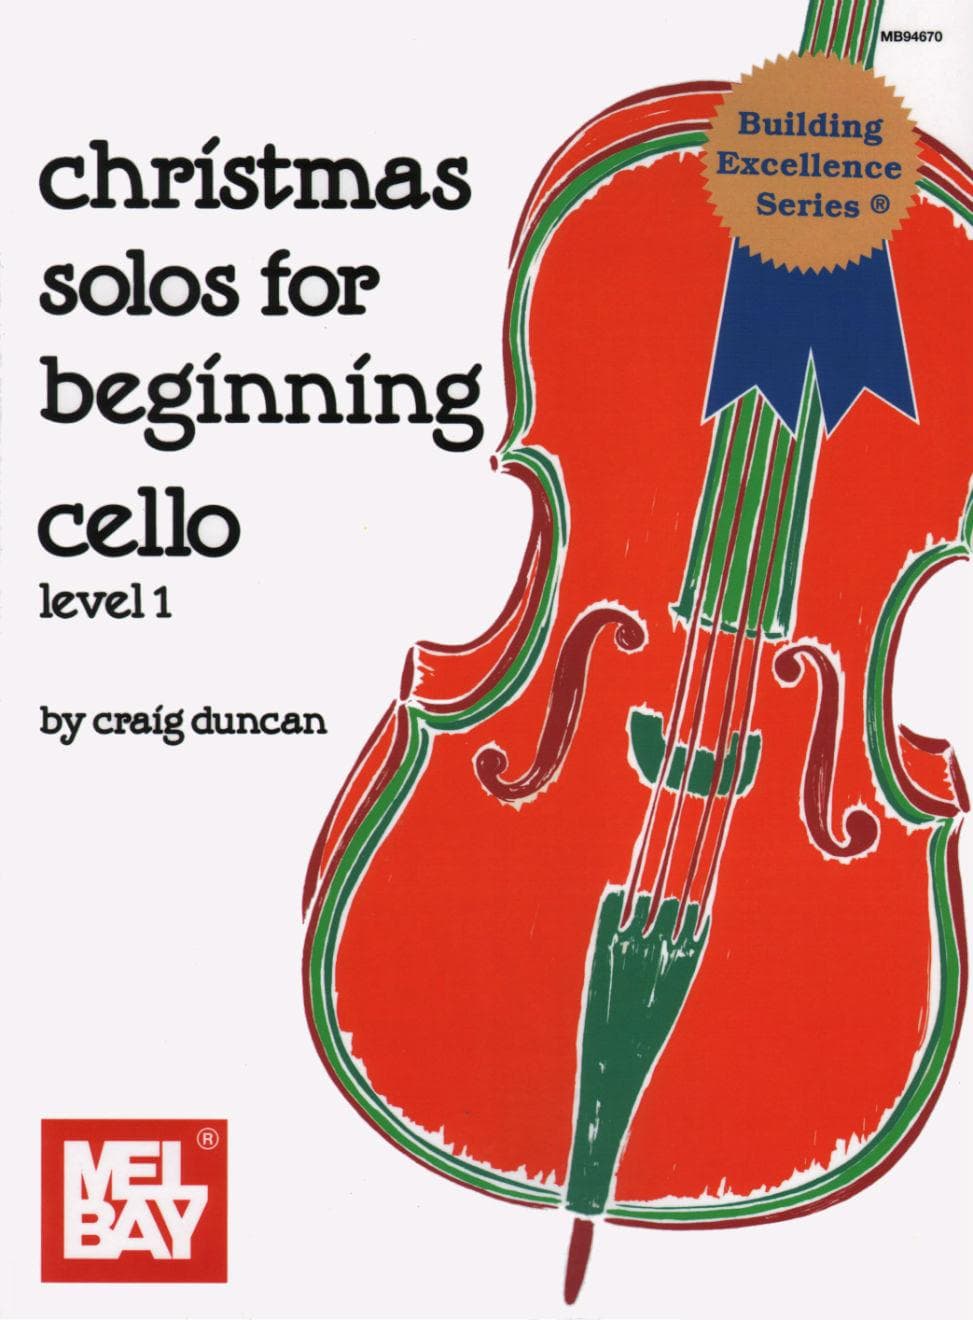 Duncan, Craig - Christmas Solos for Beginning Cello, Level 1 - Cello and Piano - Mel Bay Publications